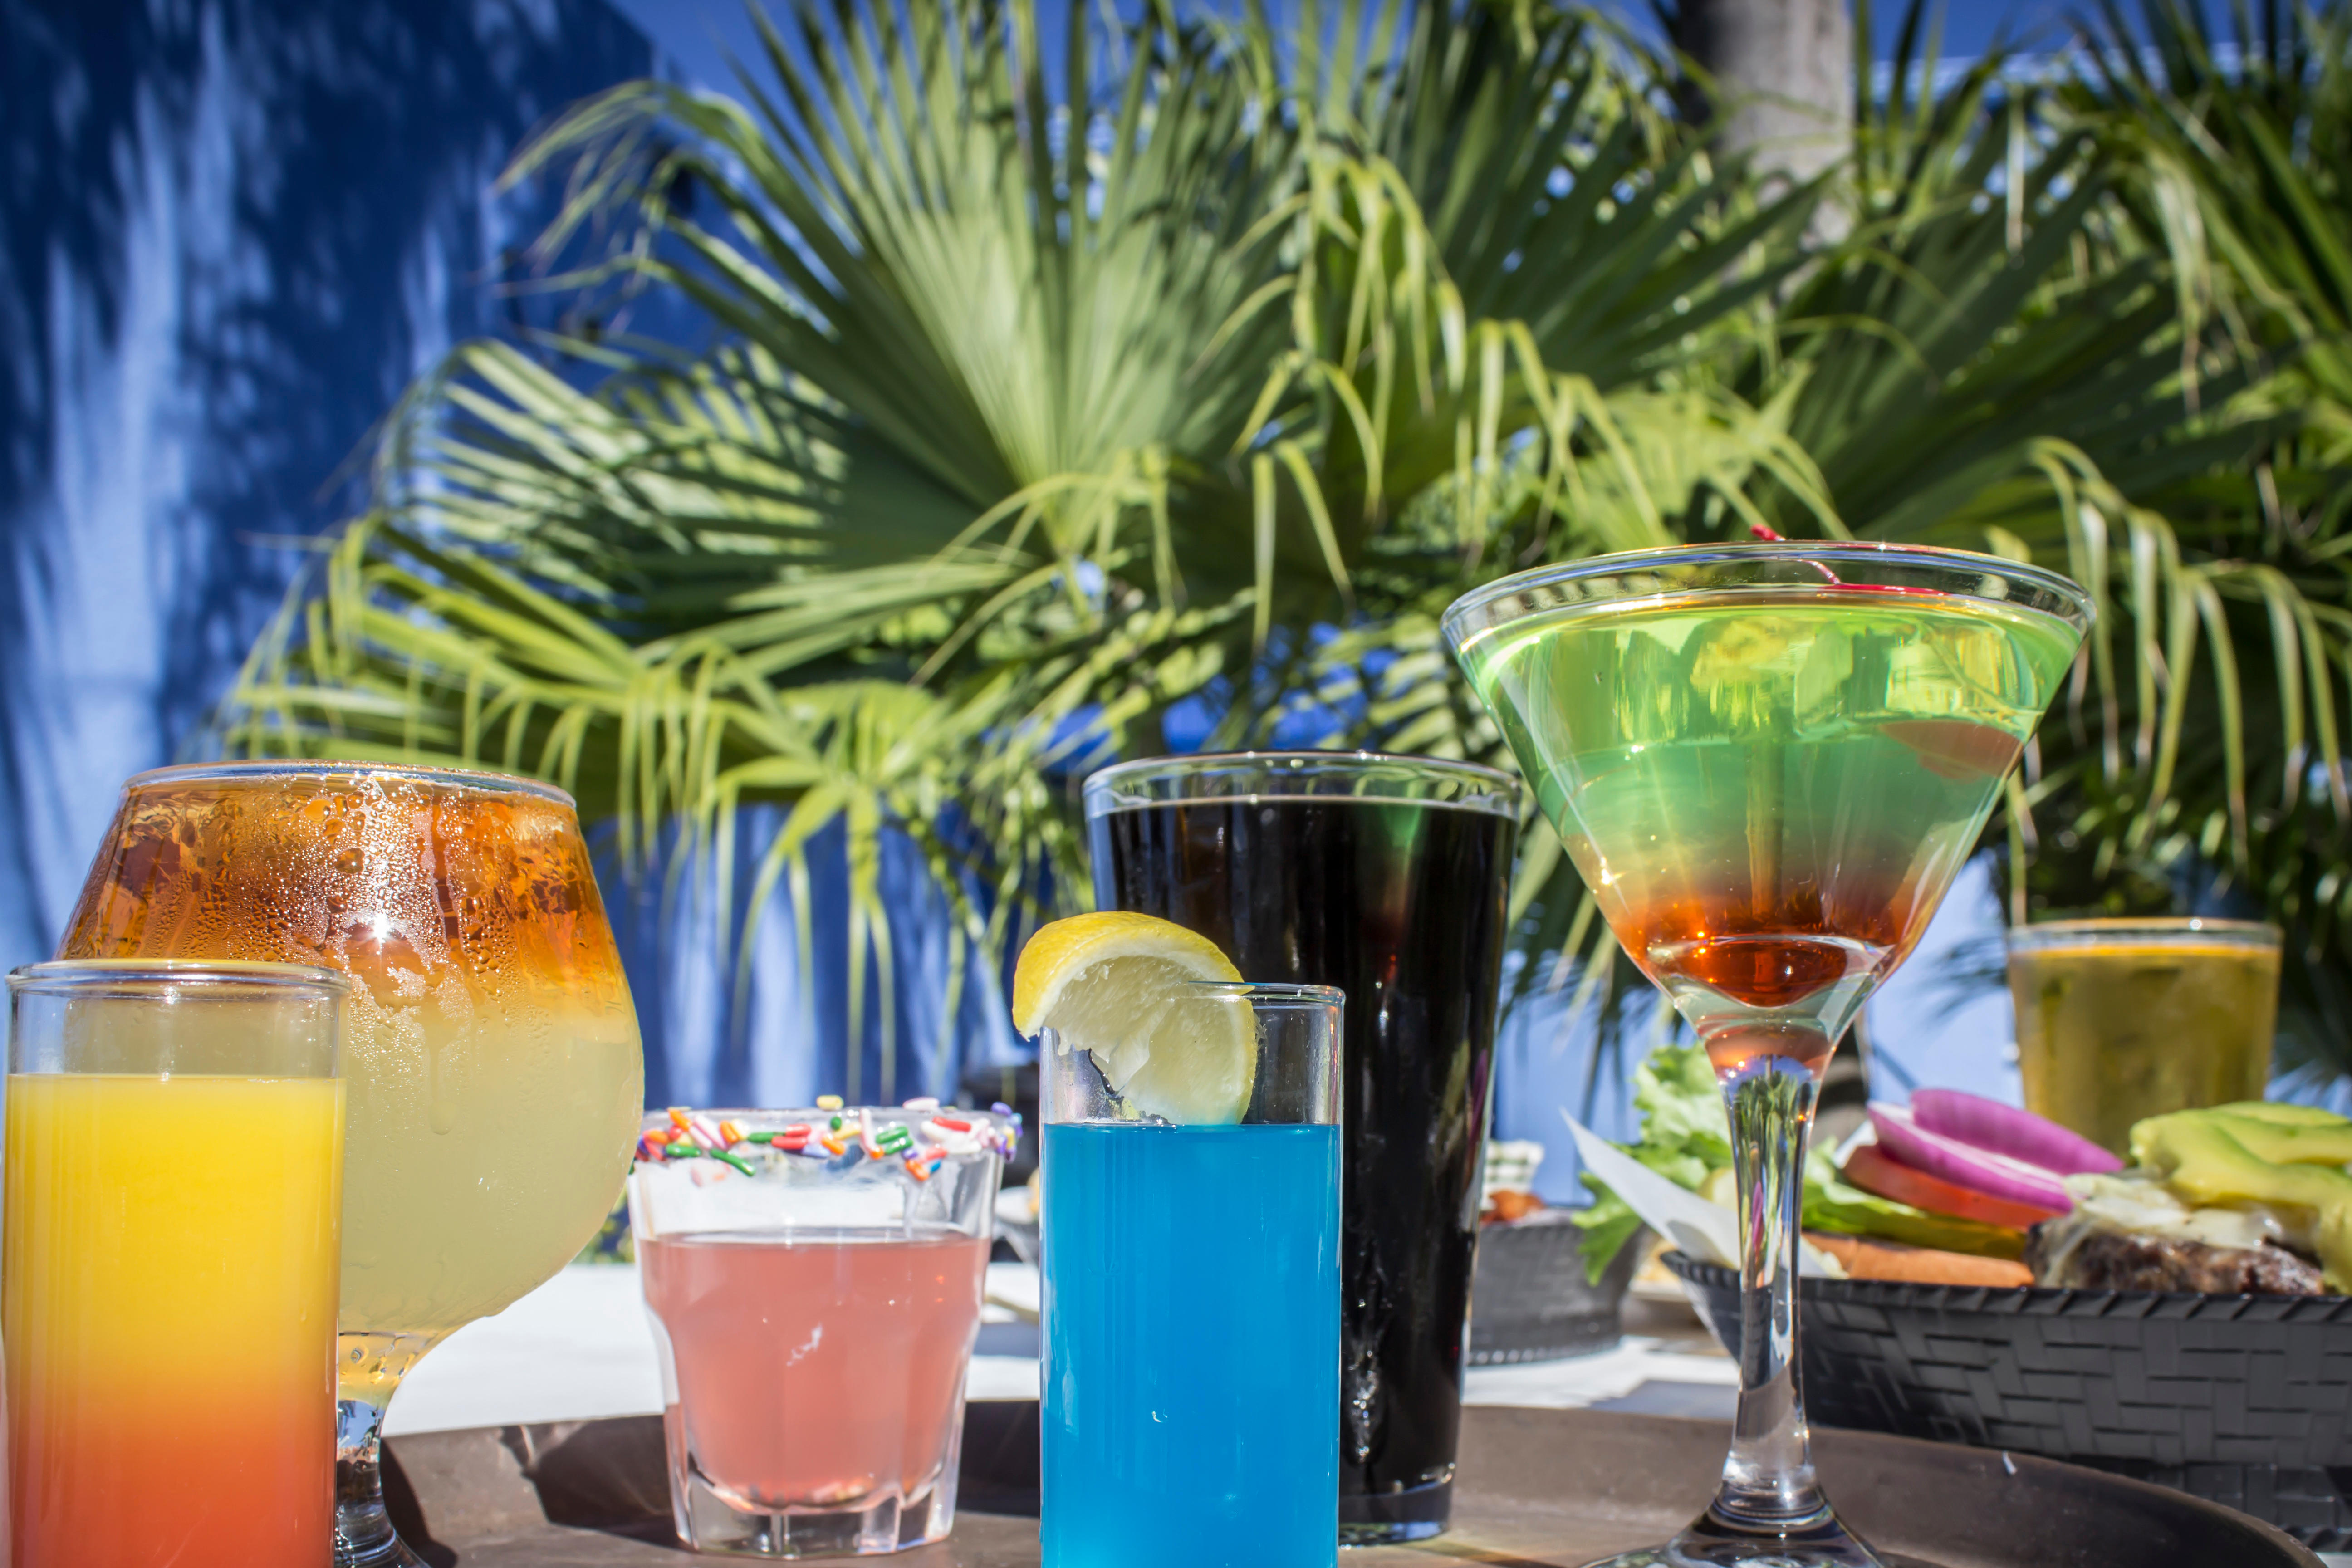 Try the Caribbean cocktails at Marina84 Sports Bar and Grill.